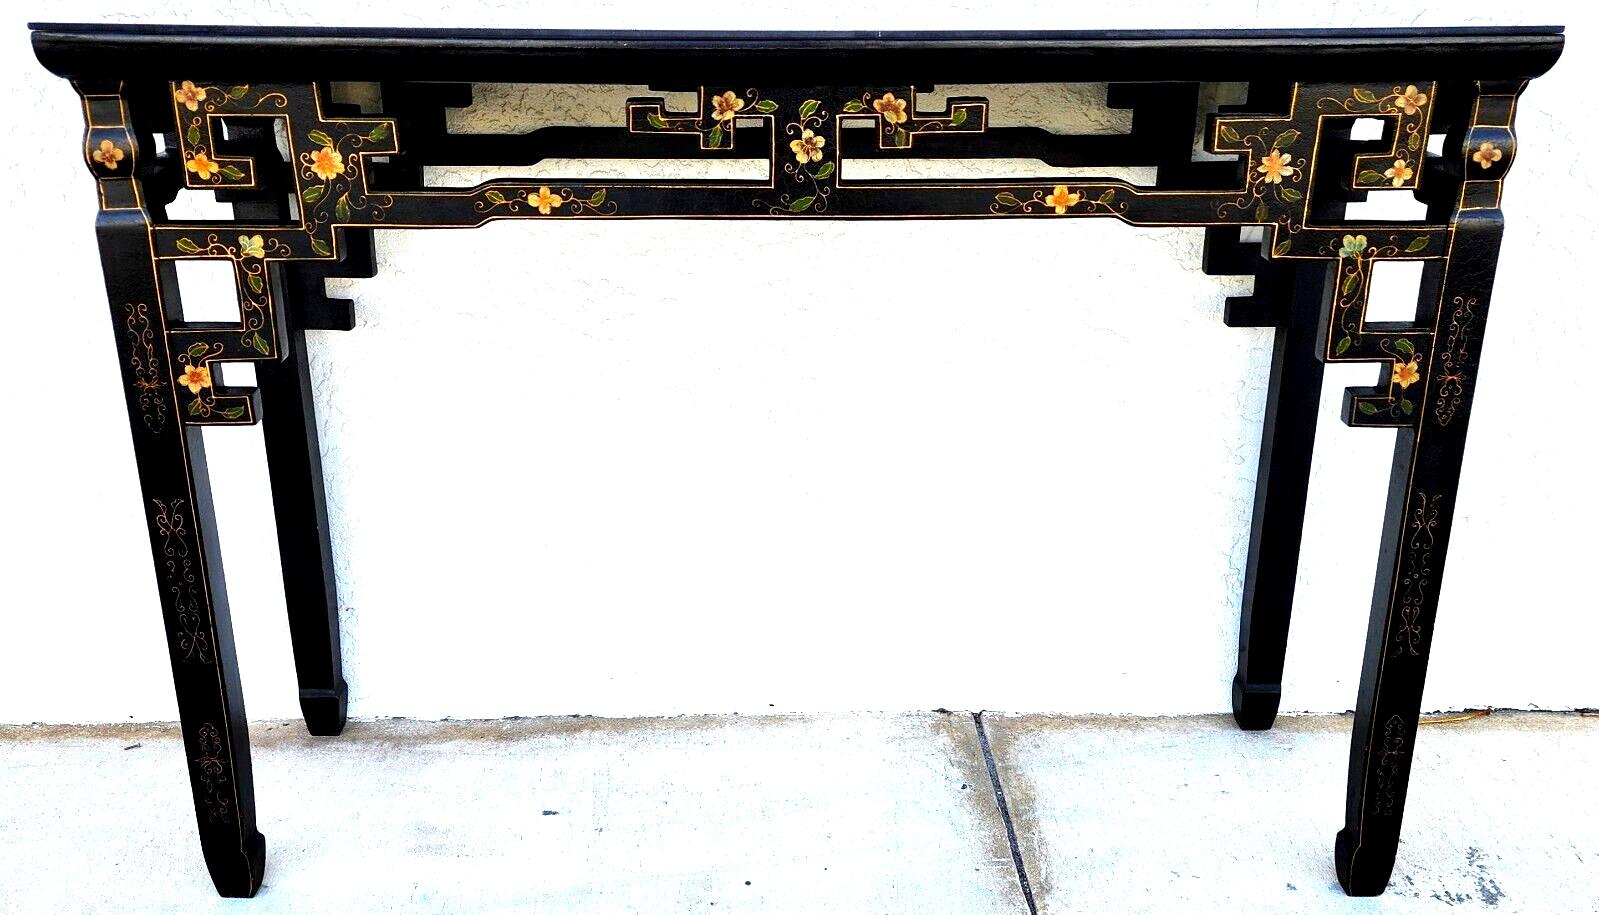 For FULL item description click on CONTINUE READING at the bottom of this page.

Offering One Of Our Recent Palm Beach Estate Fine Furniture Acquisitions Of A
Chinoiserie Sofa Altar Console Table with Hand-Painted flowers, subtle crackle finish, and